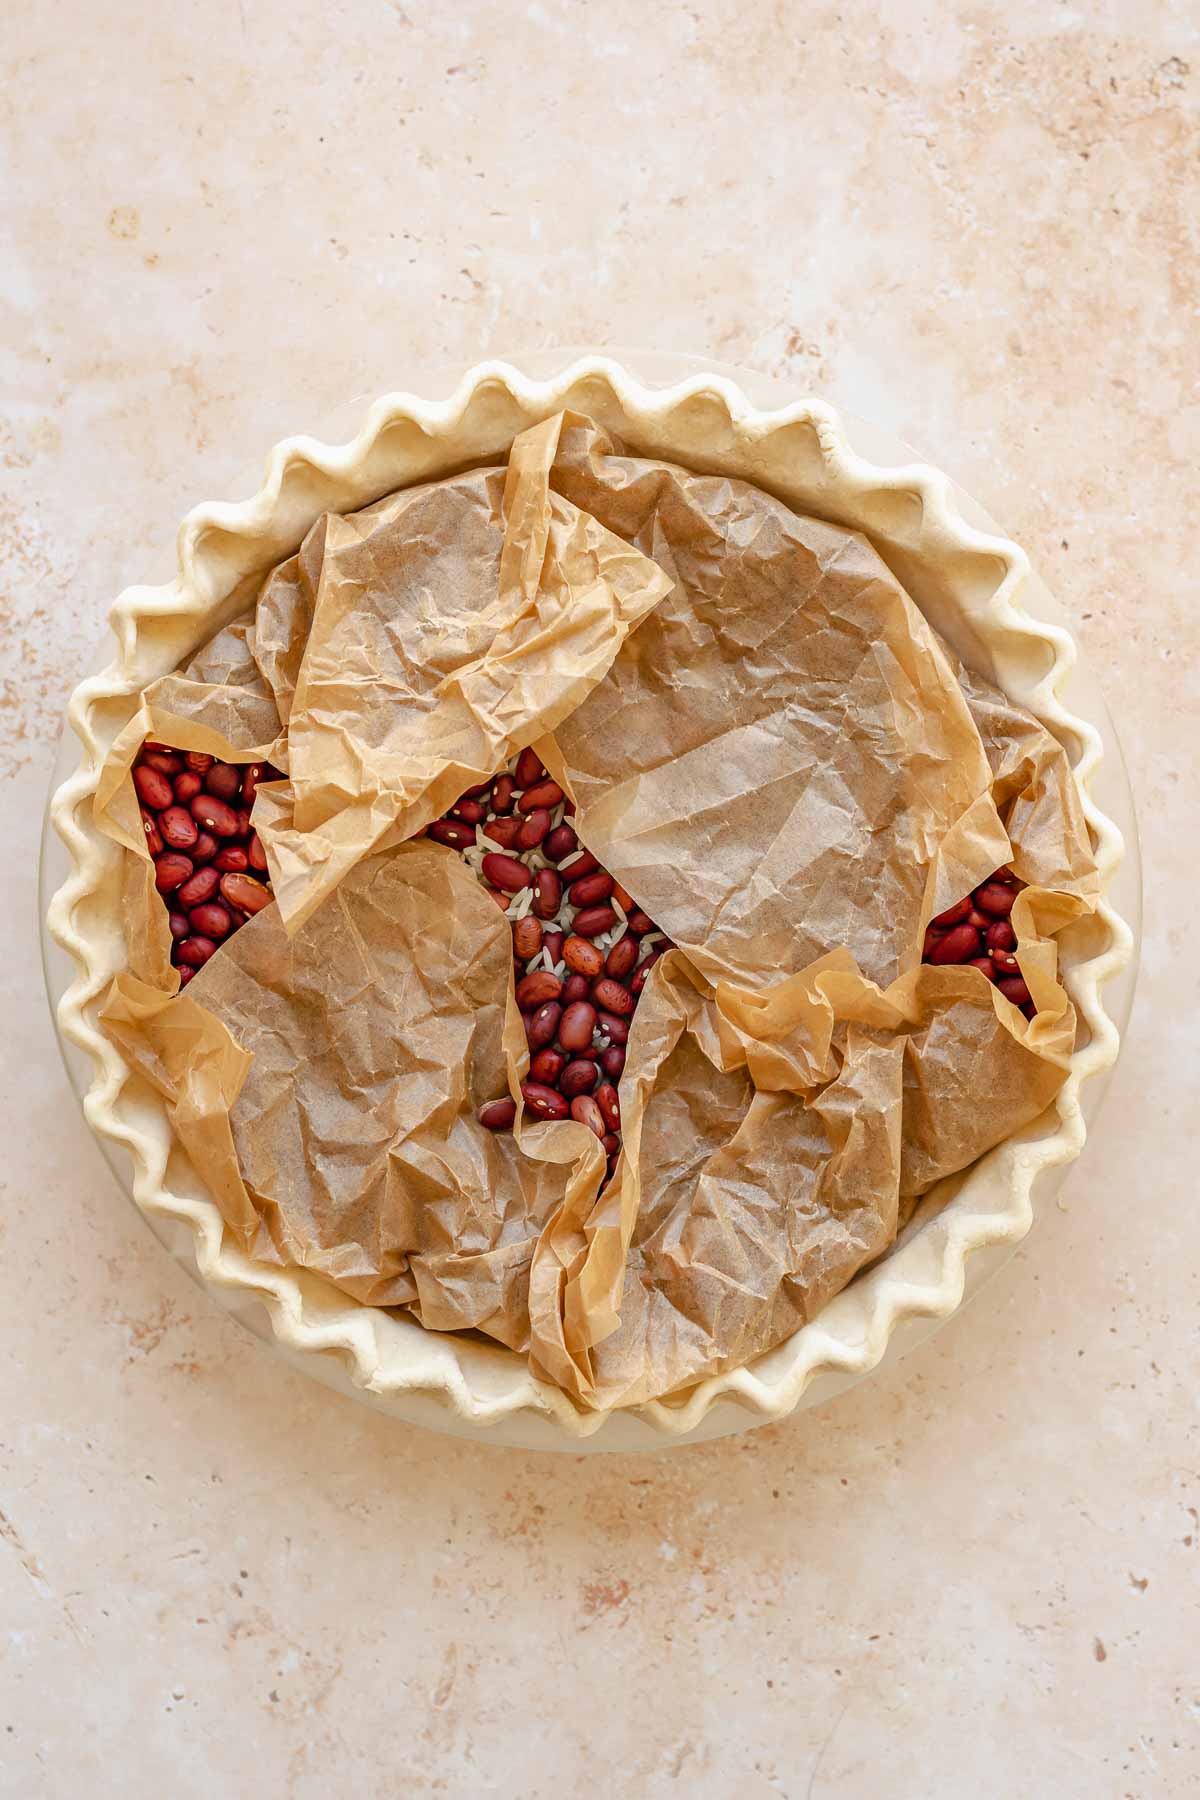 Parchment paper and pie weights in a raw pie crust.